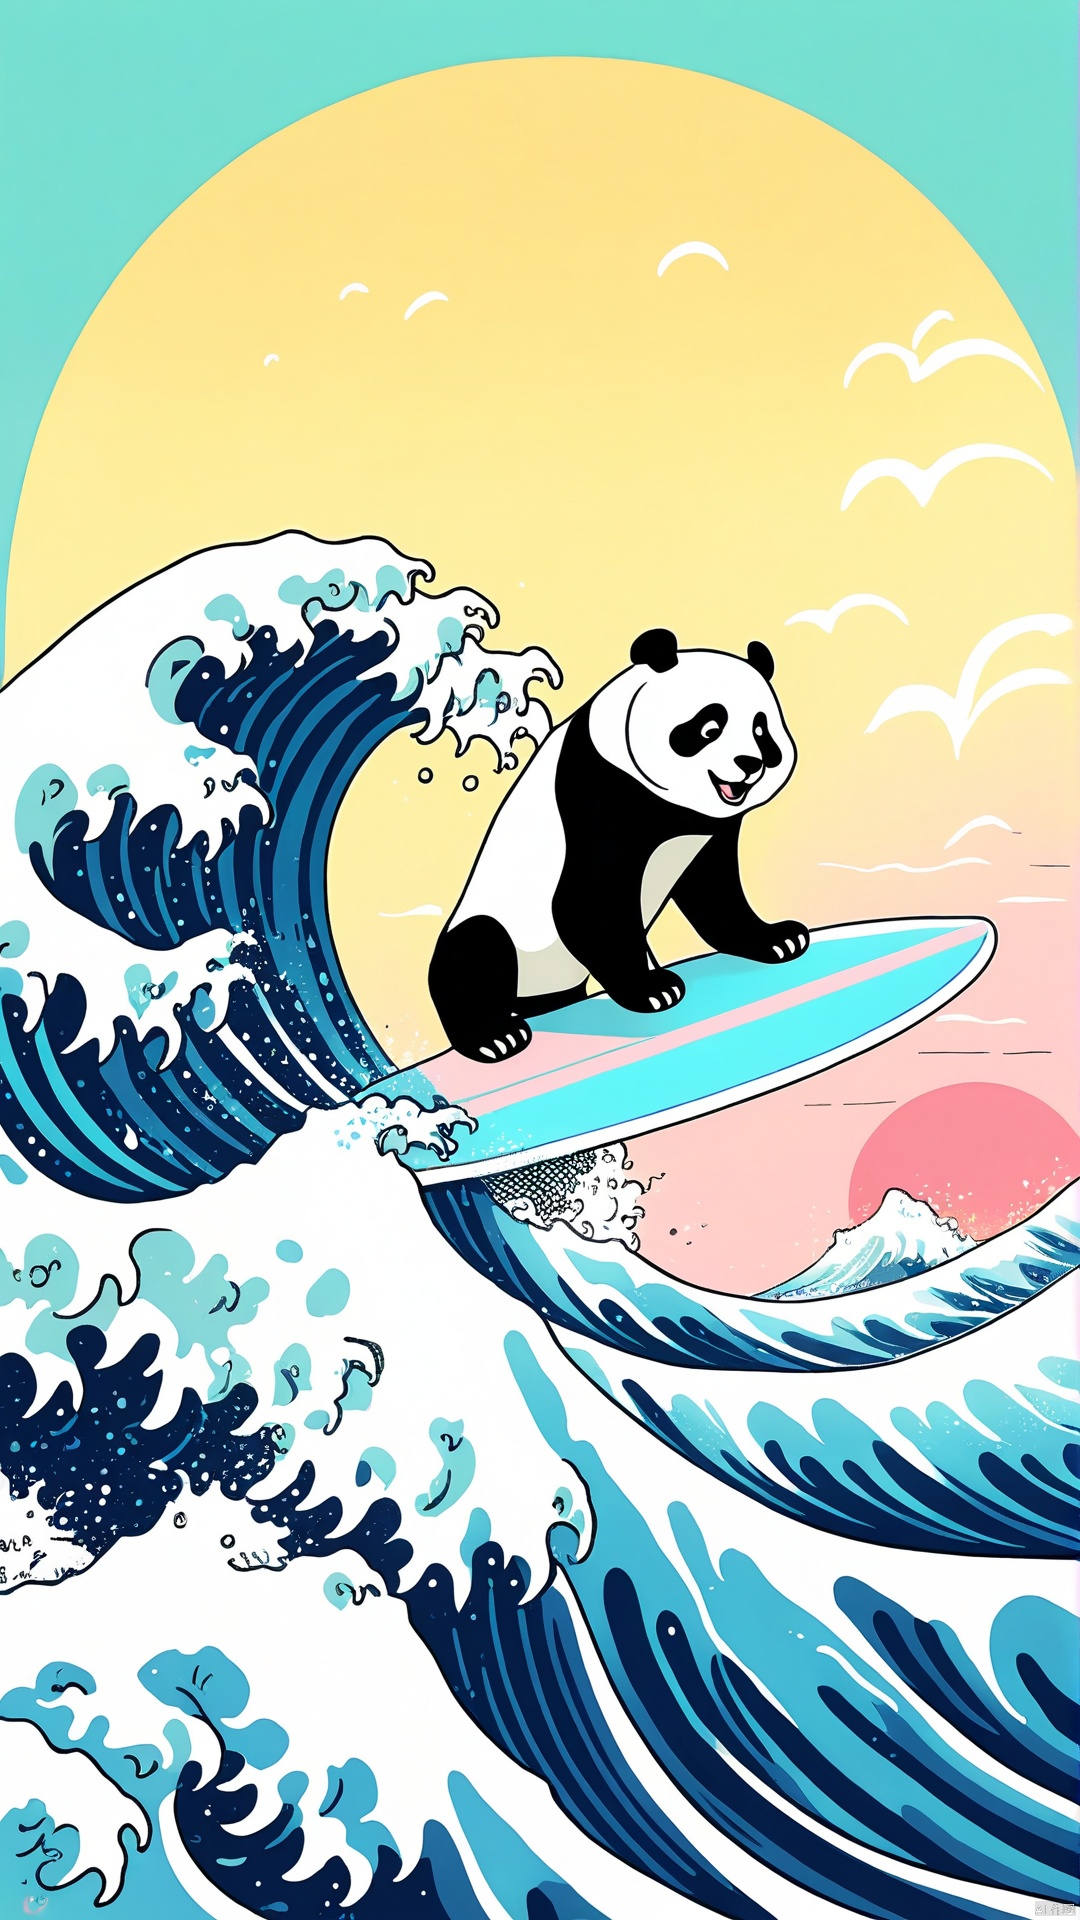  Pastel color palette, in dreamy soft pastel hues, pastelcore, pop surrealism poster illustration || A Majestic and trained panda surfing on a surfboard on The Great Wave off Kanagawa While holding a vinyl record in its hand || bright hazy pastel colors, whimsical, impossible dream, pastelpunk aesthetic fantasycore art